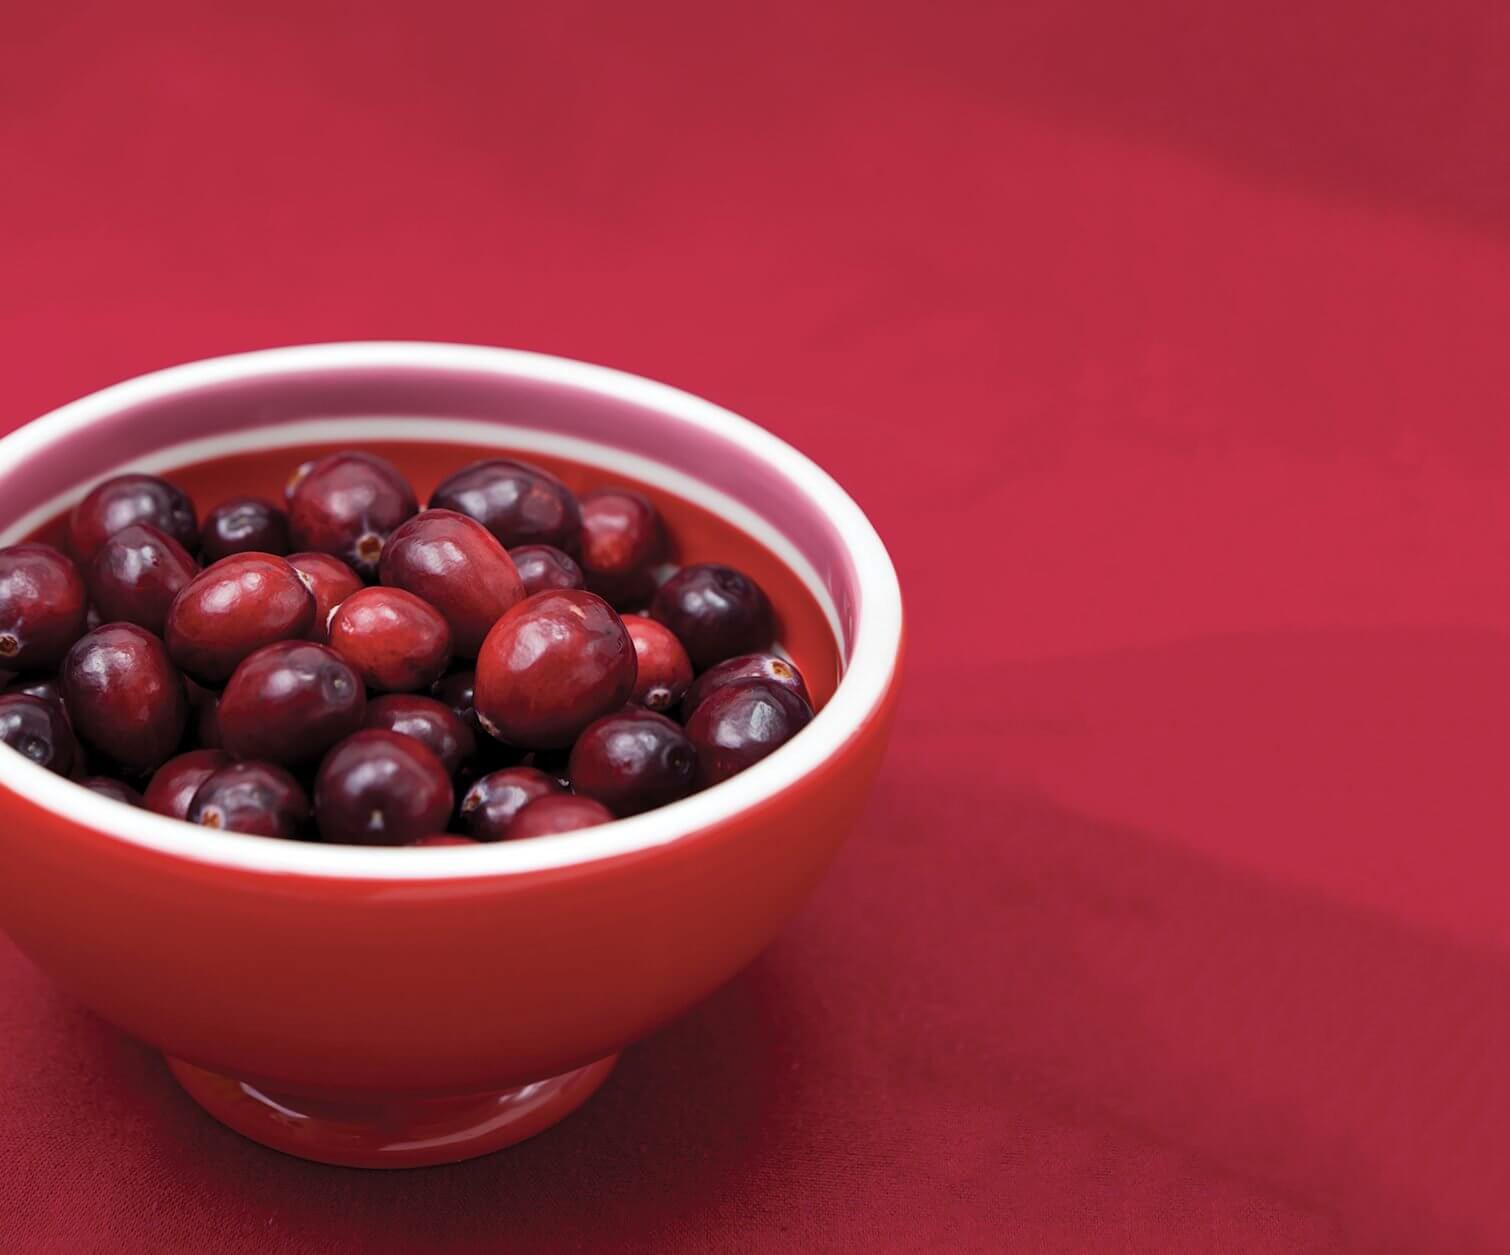 Cranberries are not only a traditional side dish, but also a great source of antioxidants.